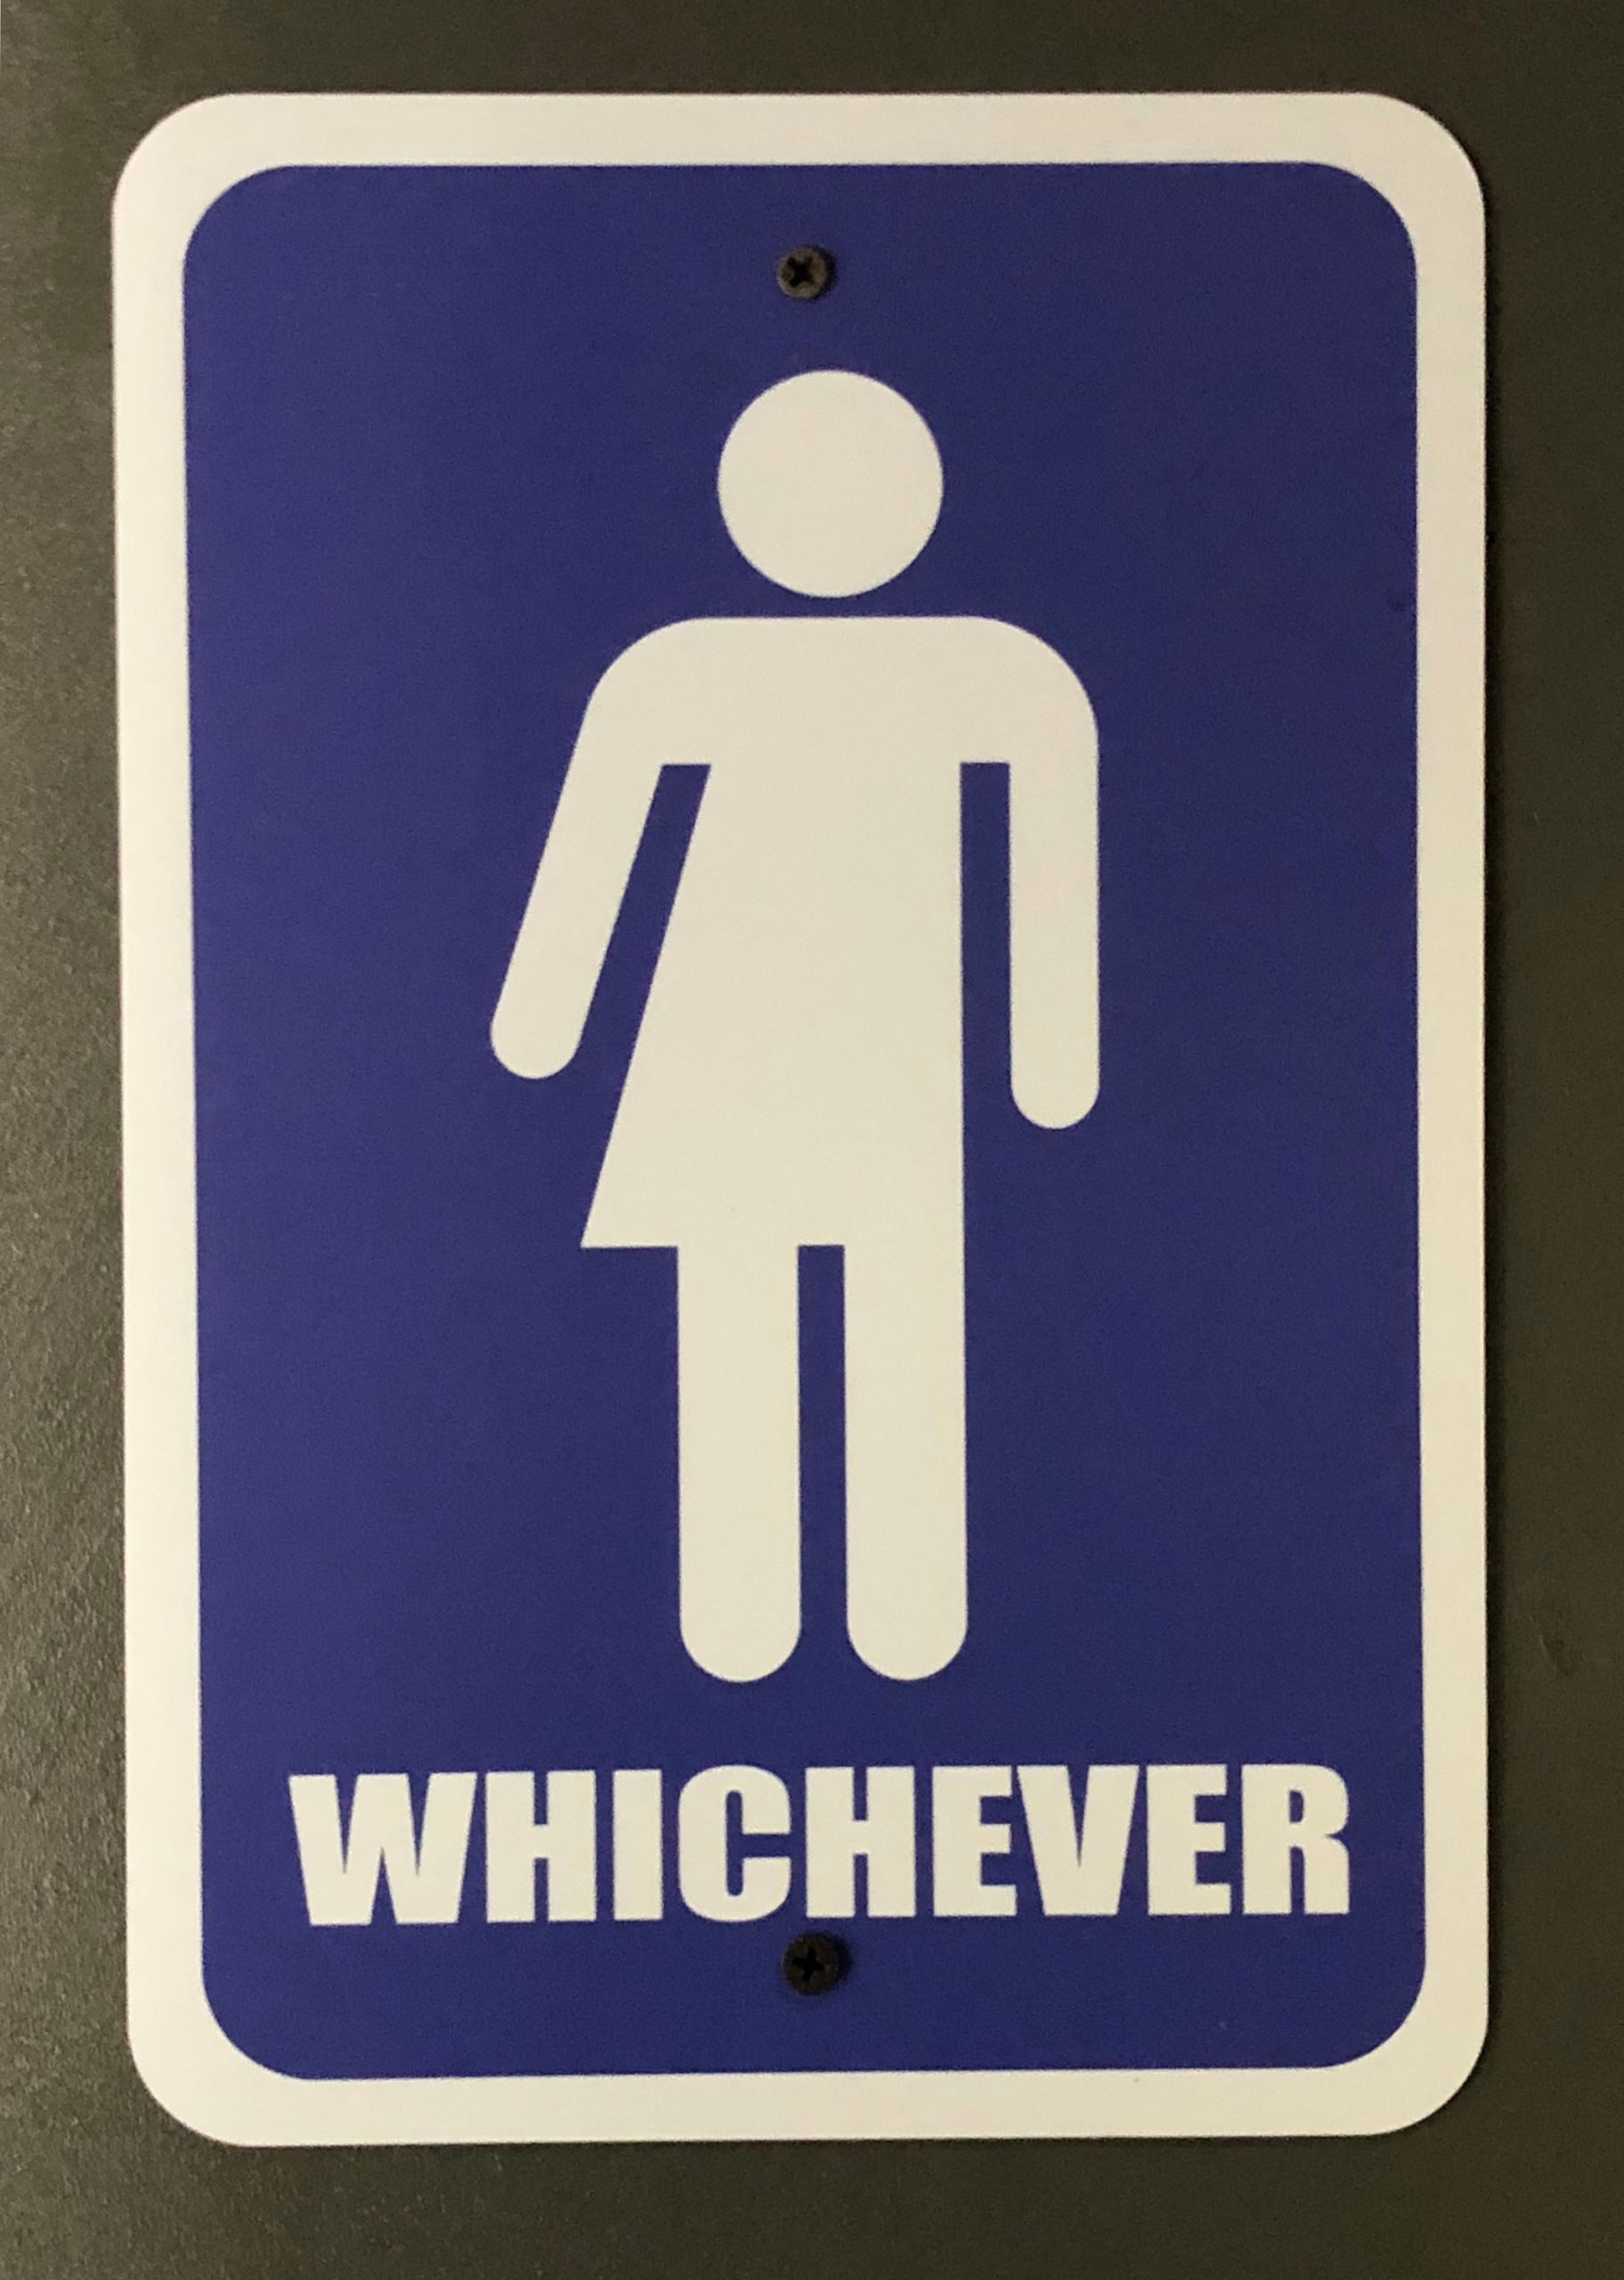 A bathroom sign that is half-male half-female with the word "whichever" beneath it.